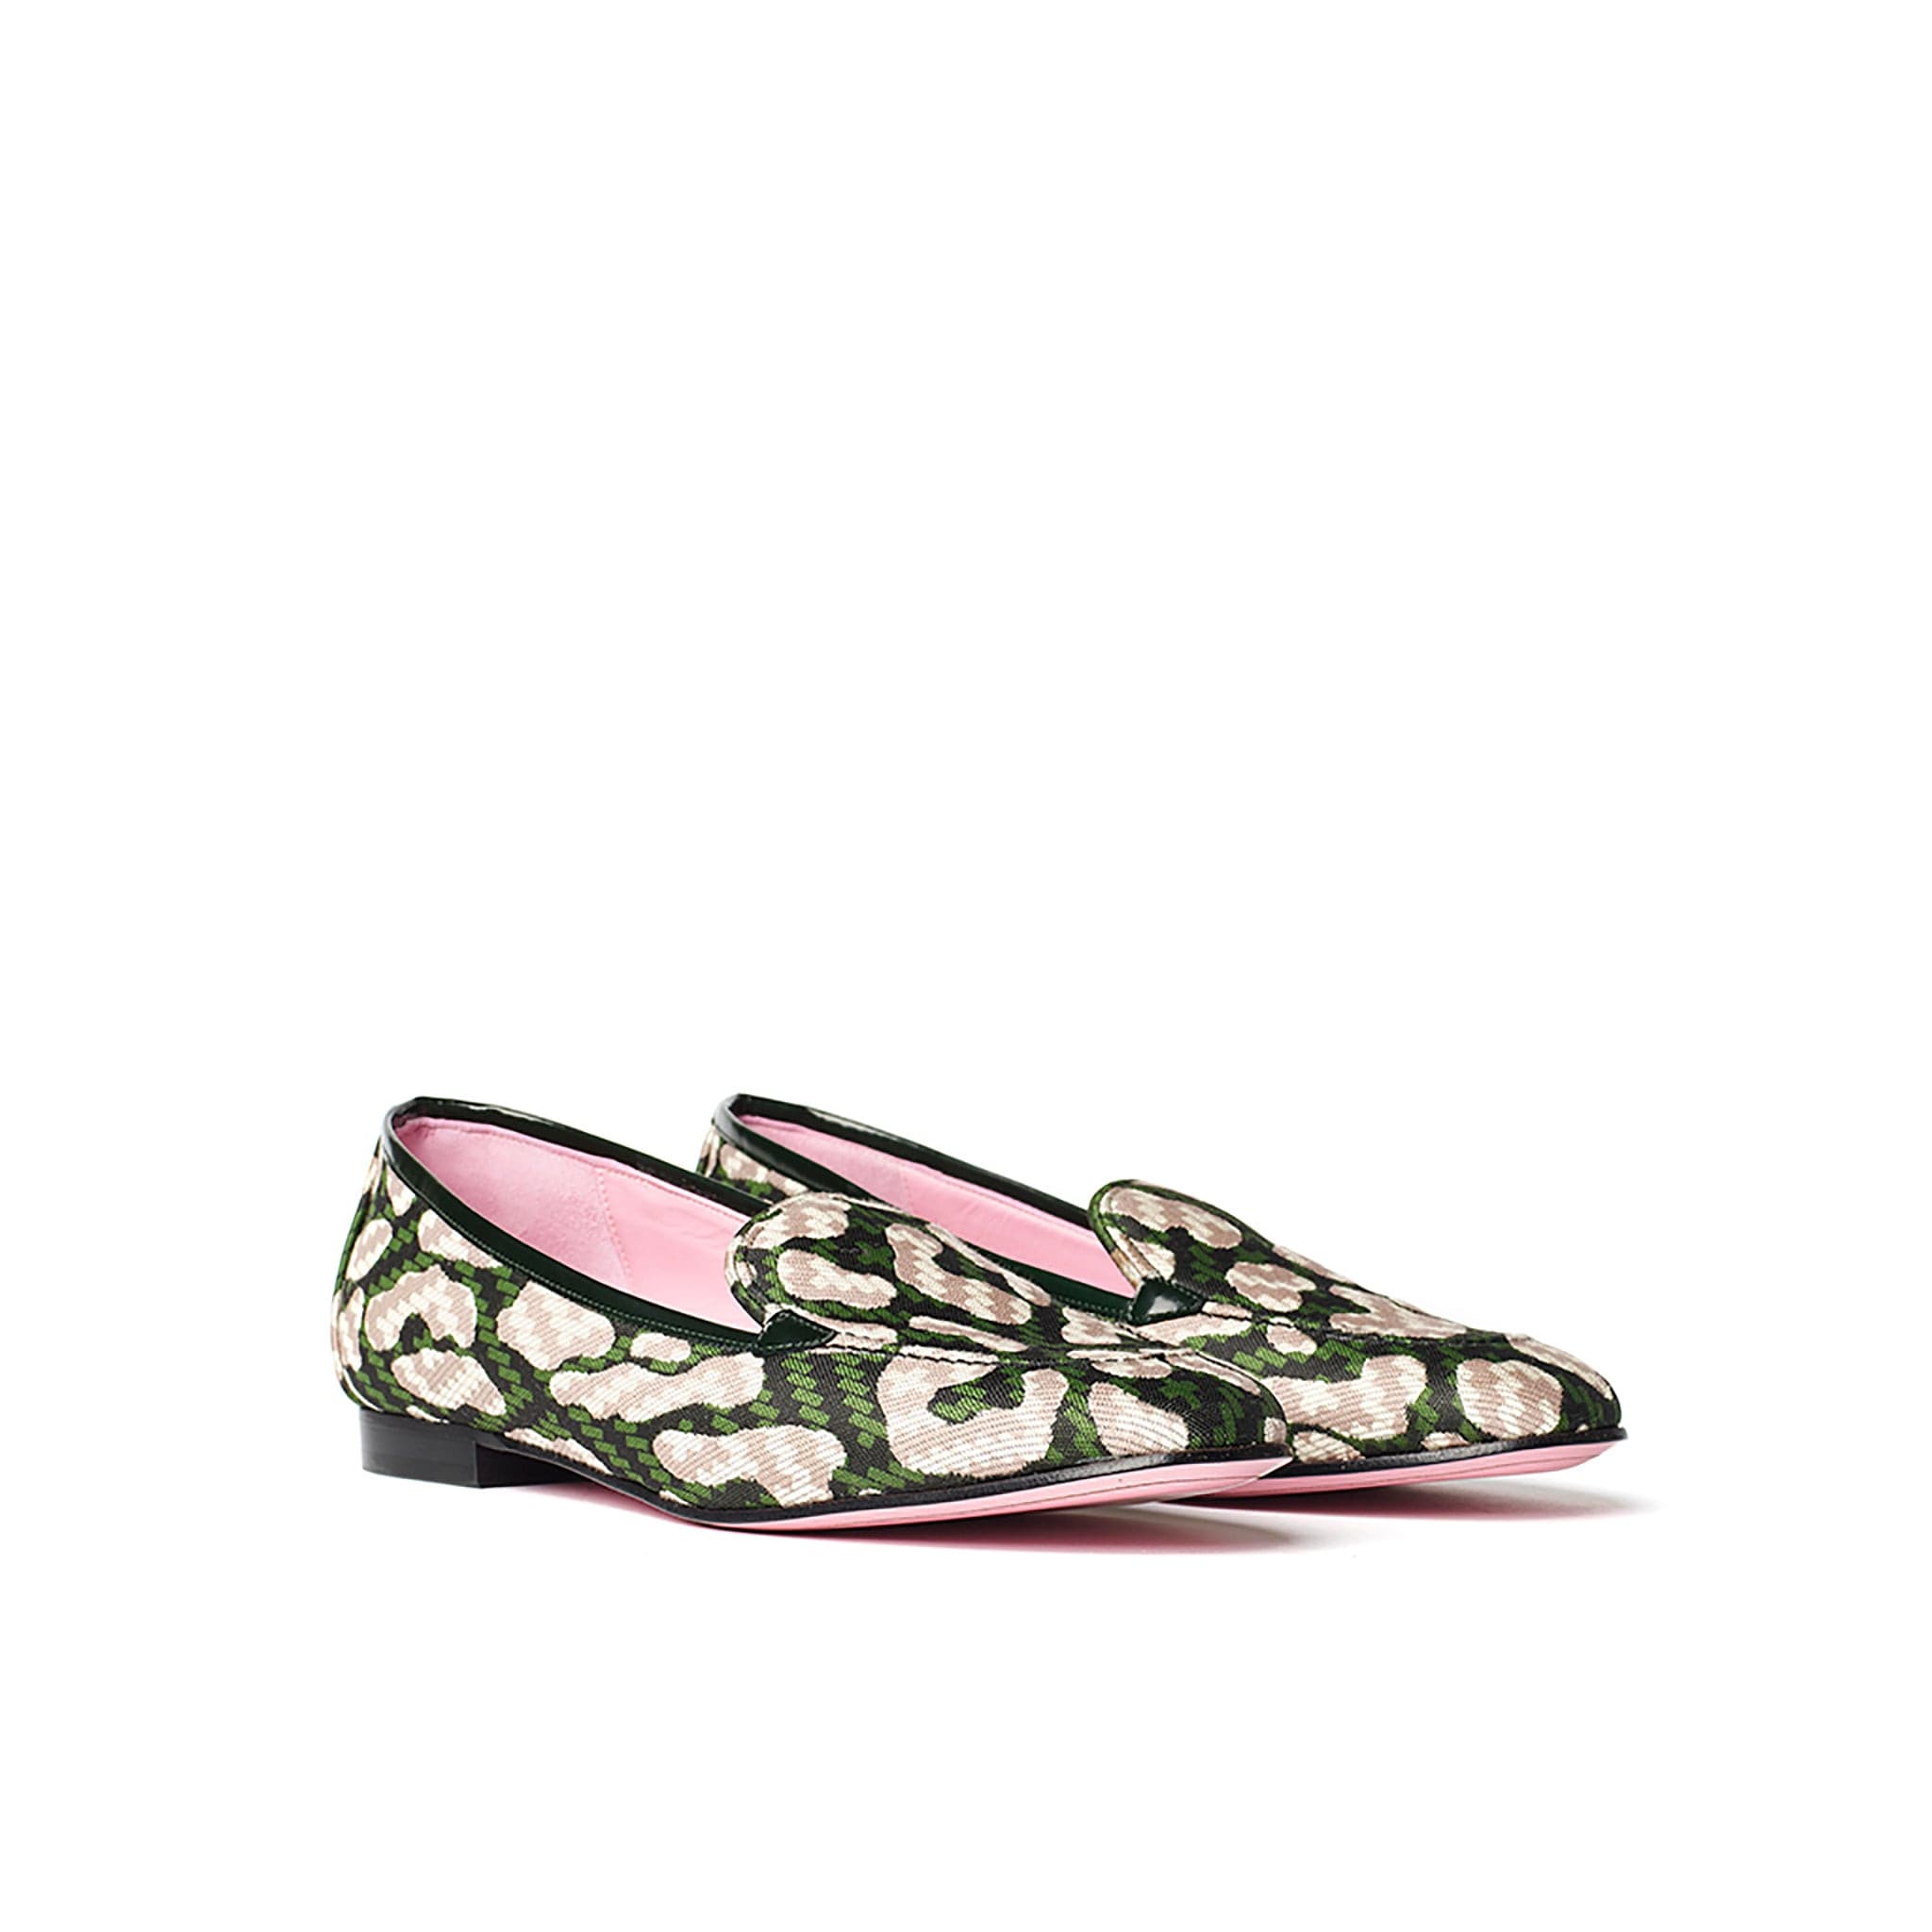 Phare classic loafer in dark green leopard jacquard 3.4 view 